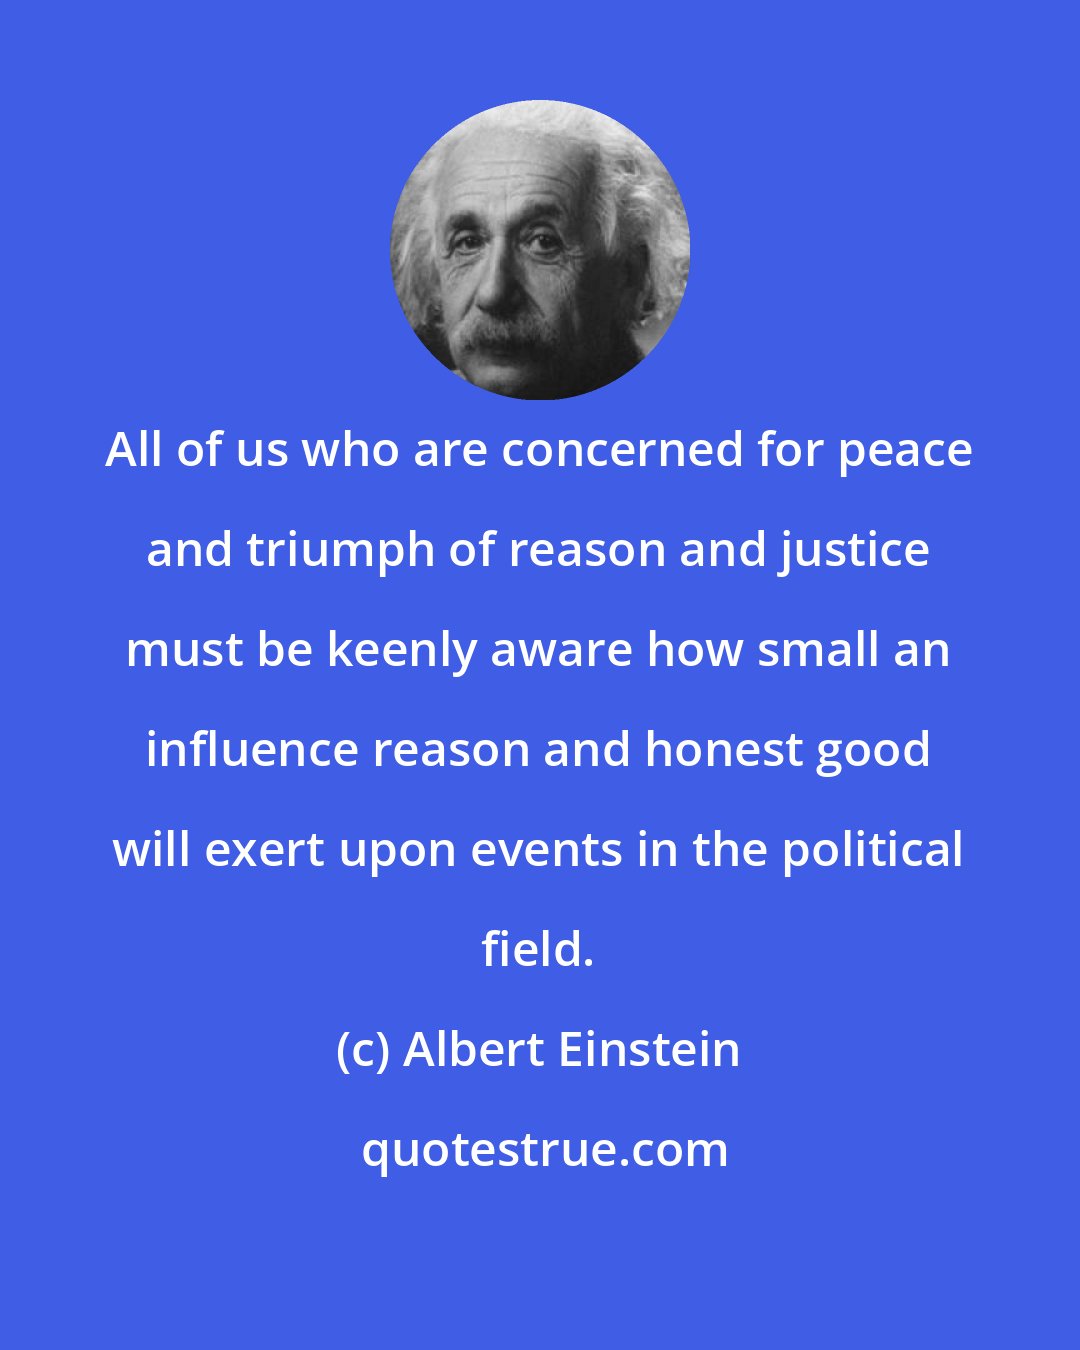 Albert Einstein: All of us who are concerned for peace and triumph of reason and justice must be keenly aware how small an influence reason and honest good will exert upon events in the political field.